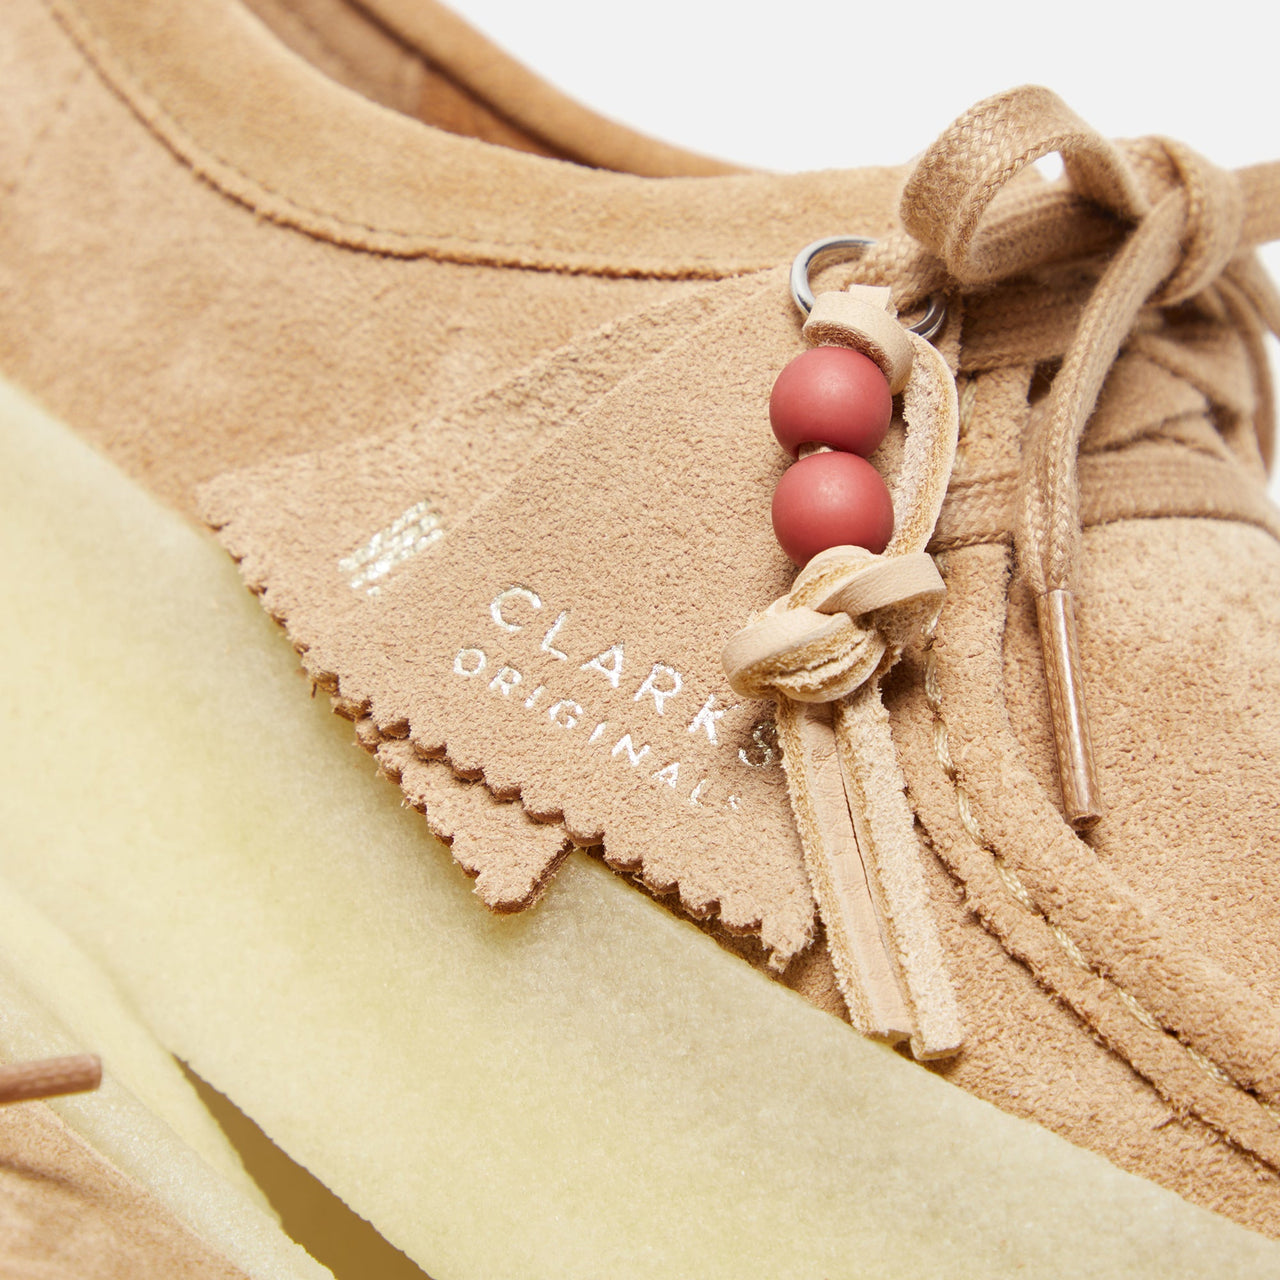 Pair of Clarks Originals Wallabee Cup Women's Warm Beige Suede 261732524 shoes in a natural setting